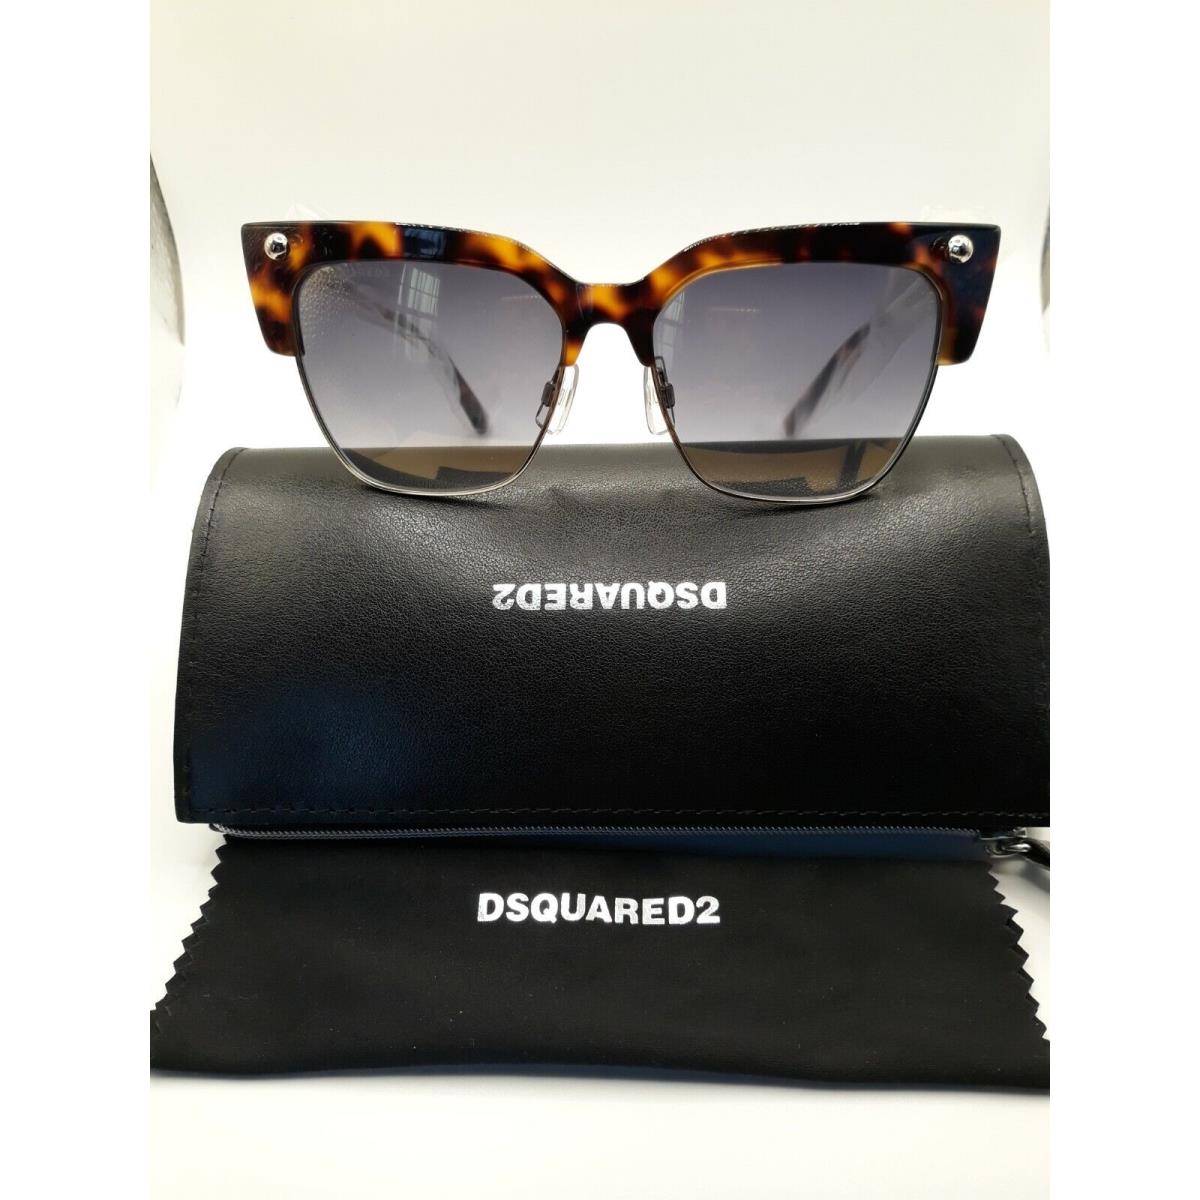 DSQUARED2 Frederica Sunnies DQ 0279 52C S5-16